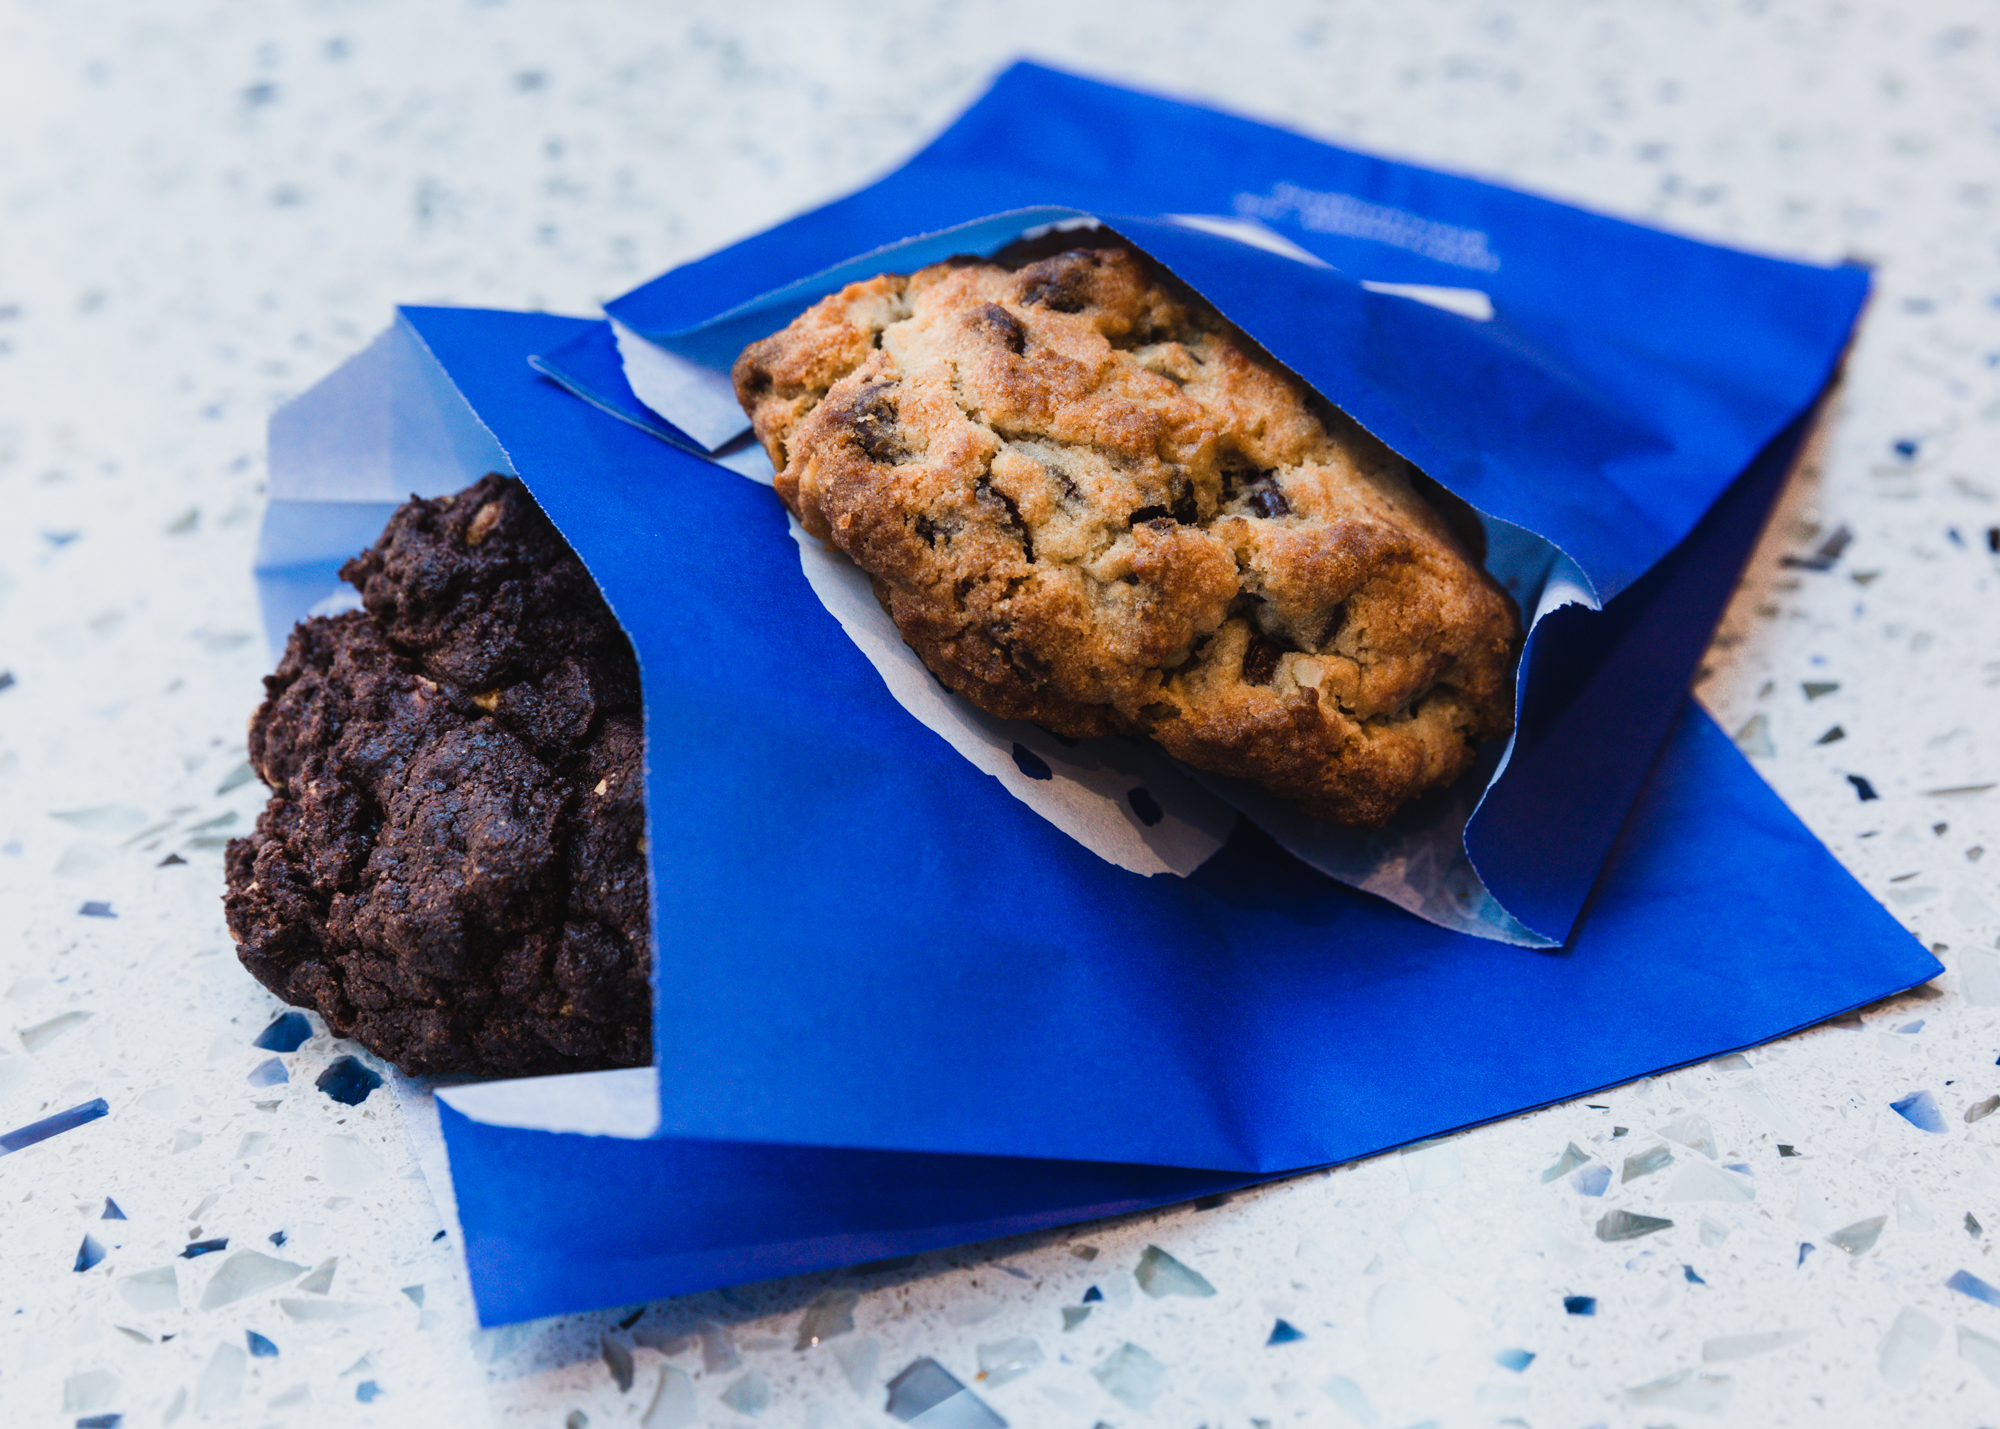 Two cookies —&nbsp;one chocolate chip, one dark chocolate —&nbsp;are in individual bright blue paper sleeves, sitting on a countertop.